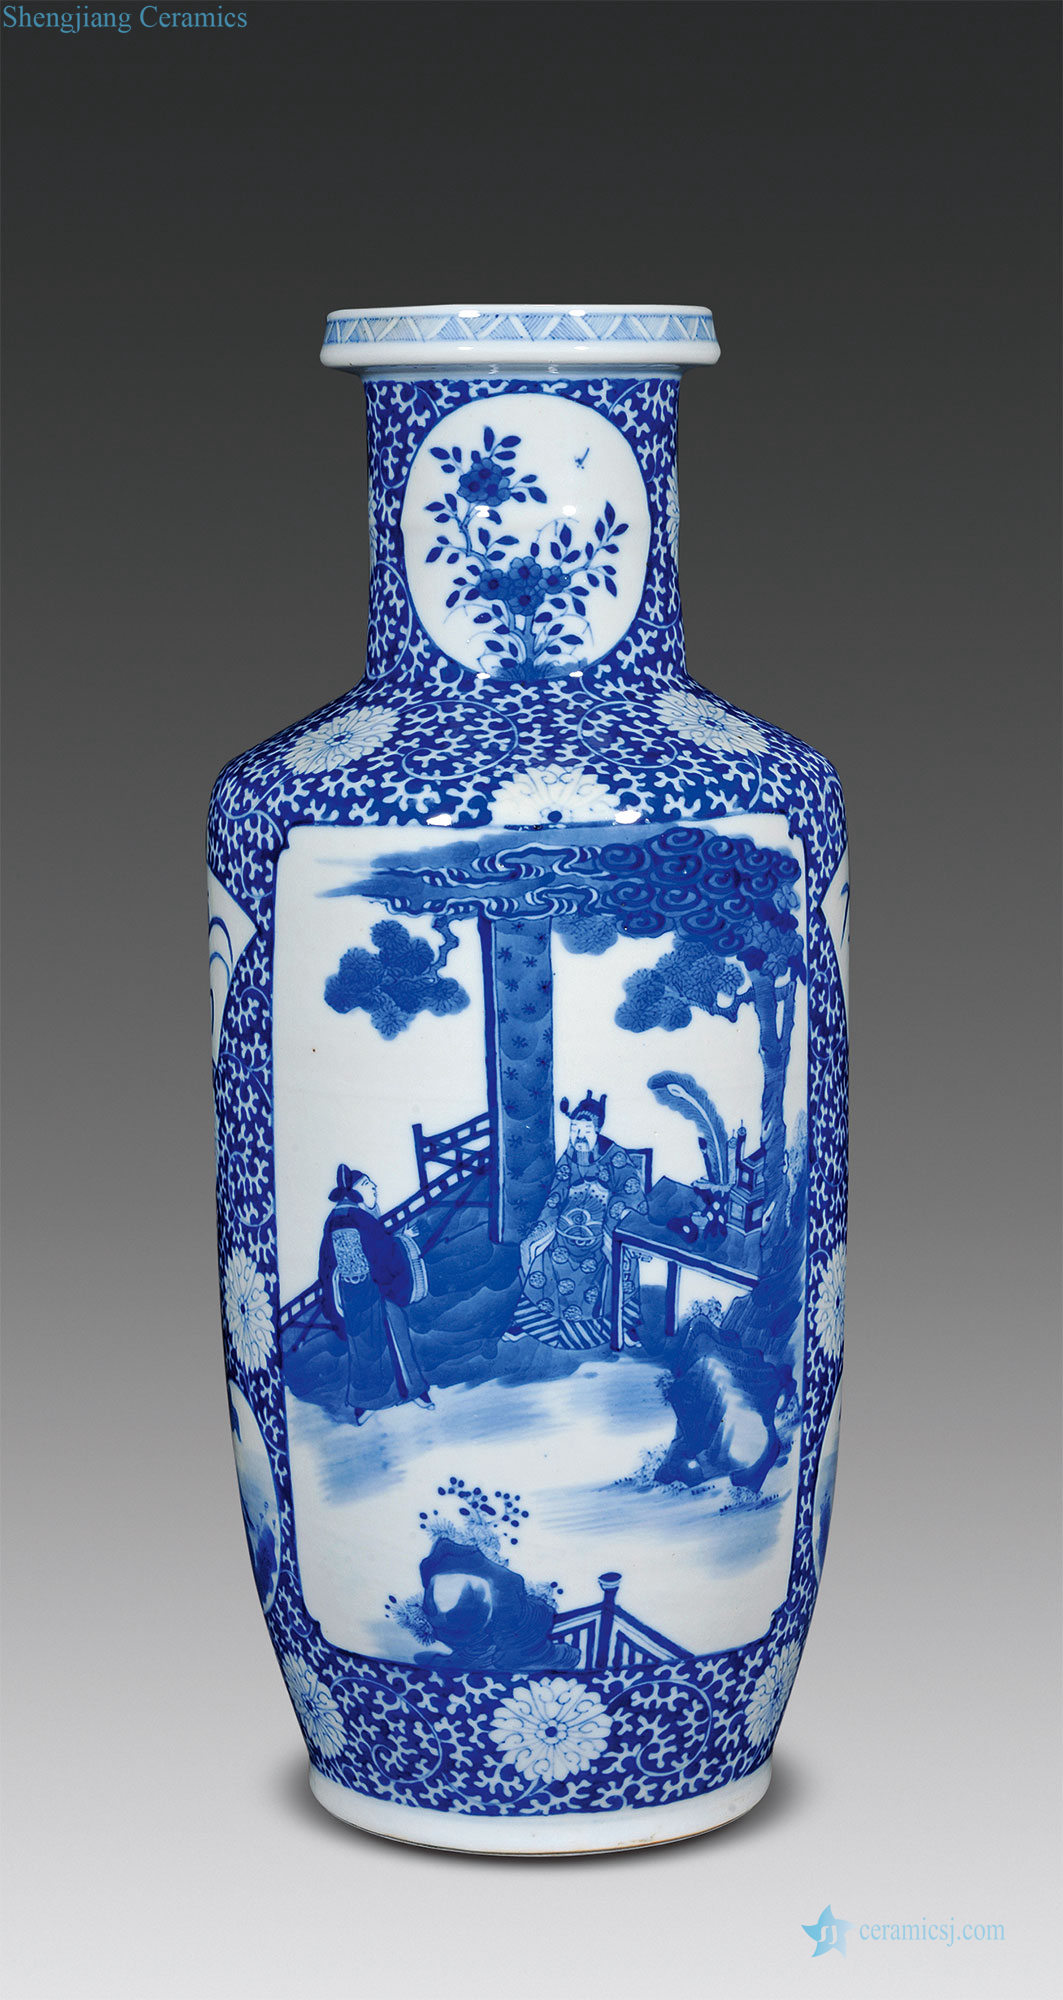 In late qing dynasty Blue and white lotus flower medallion character lines were bottles